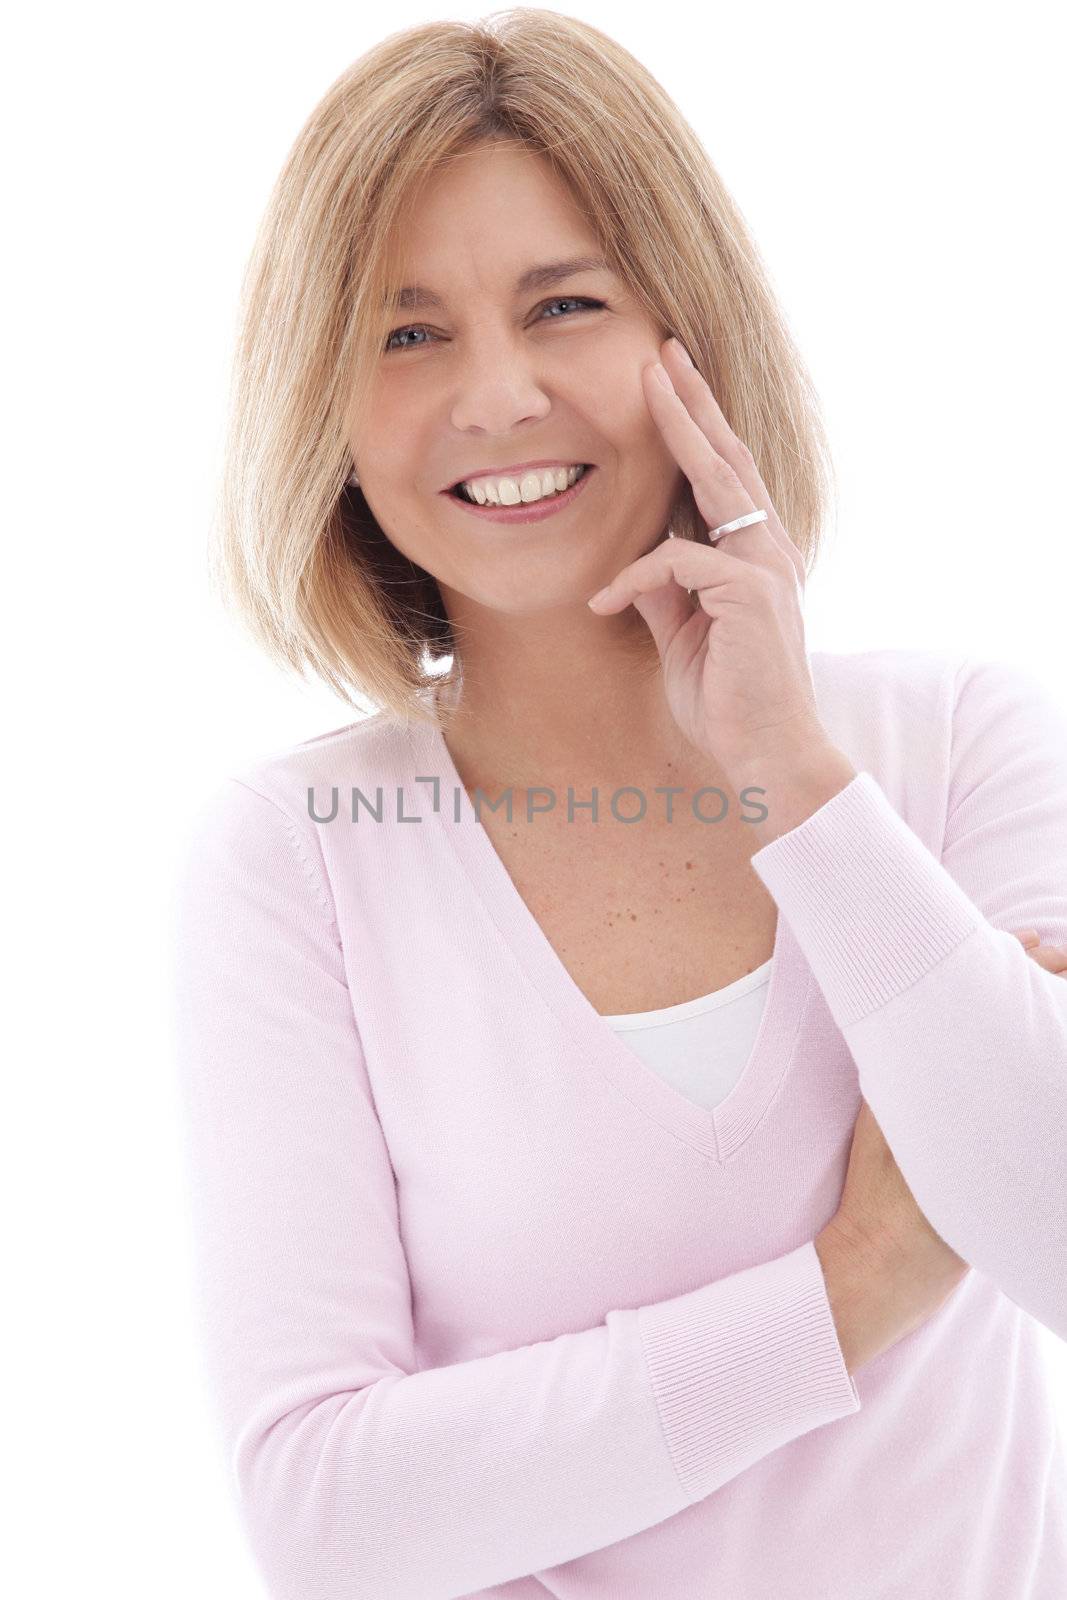 Attractive mature woman with a lively smile holding her hand to her cheek looking at the camera, upper body portrait isolated on white